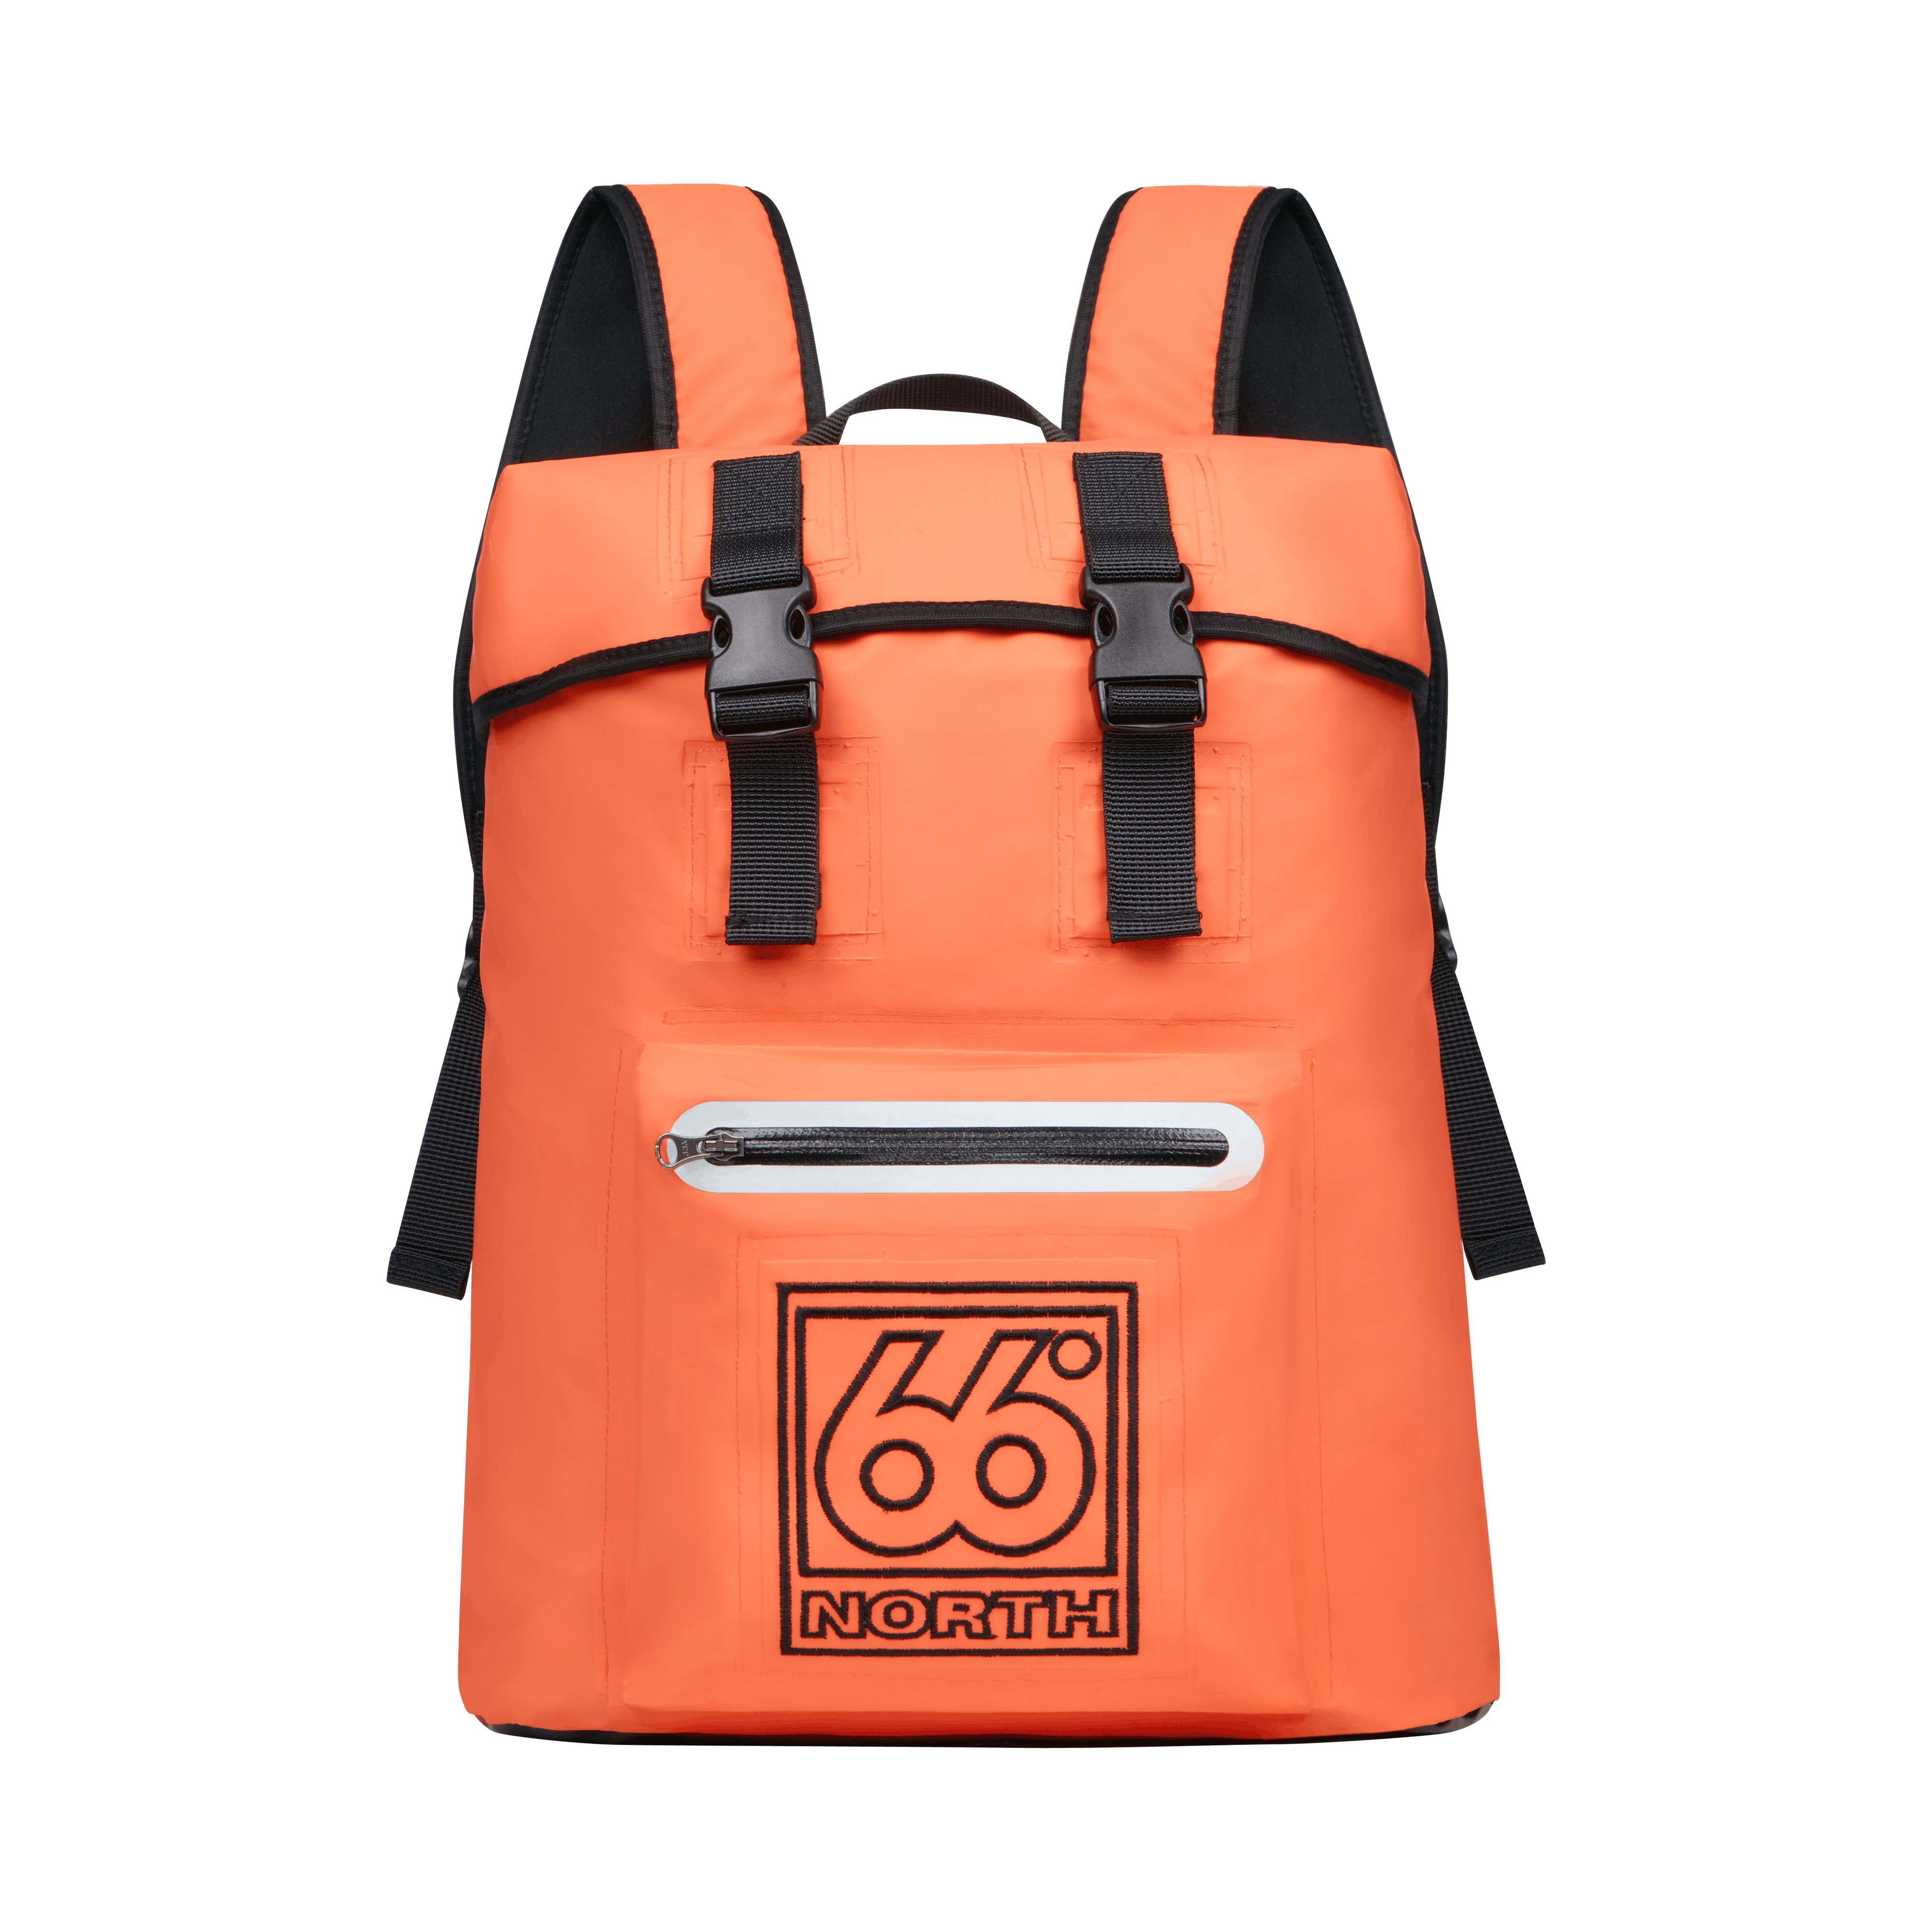 66 North Women's Backpack Accessories - Tangerine - One Size